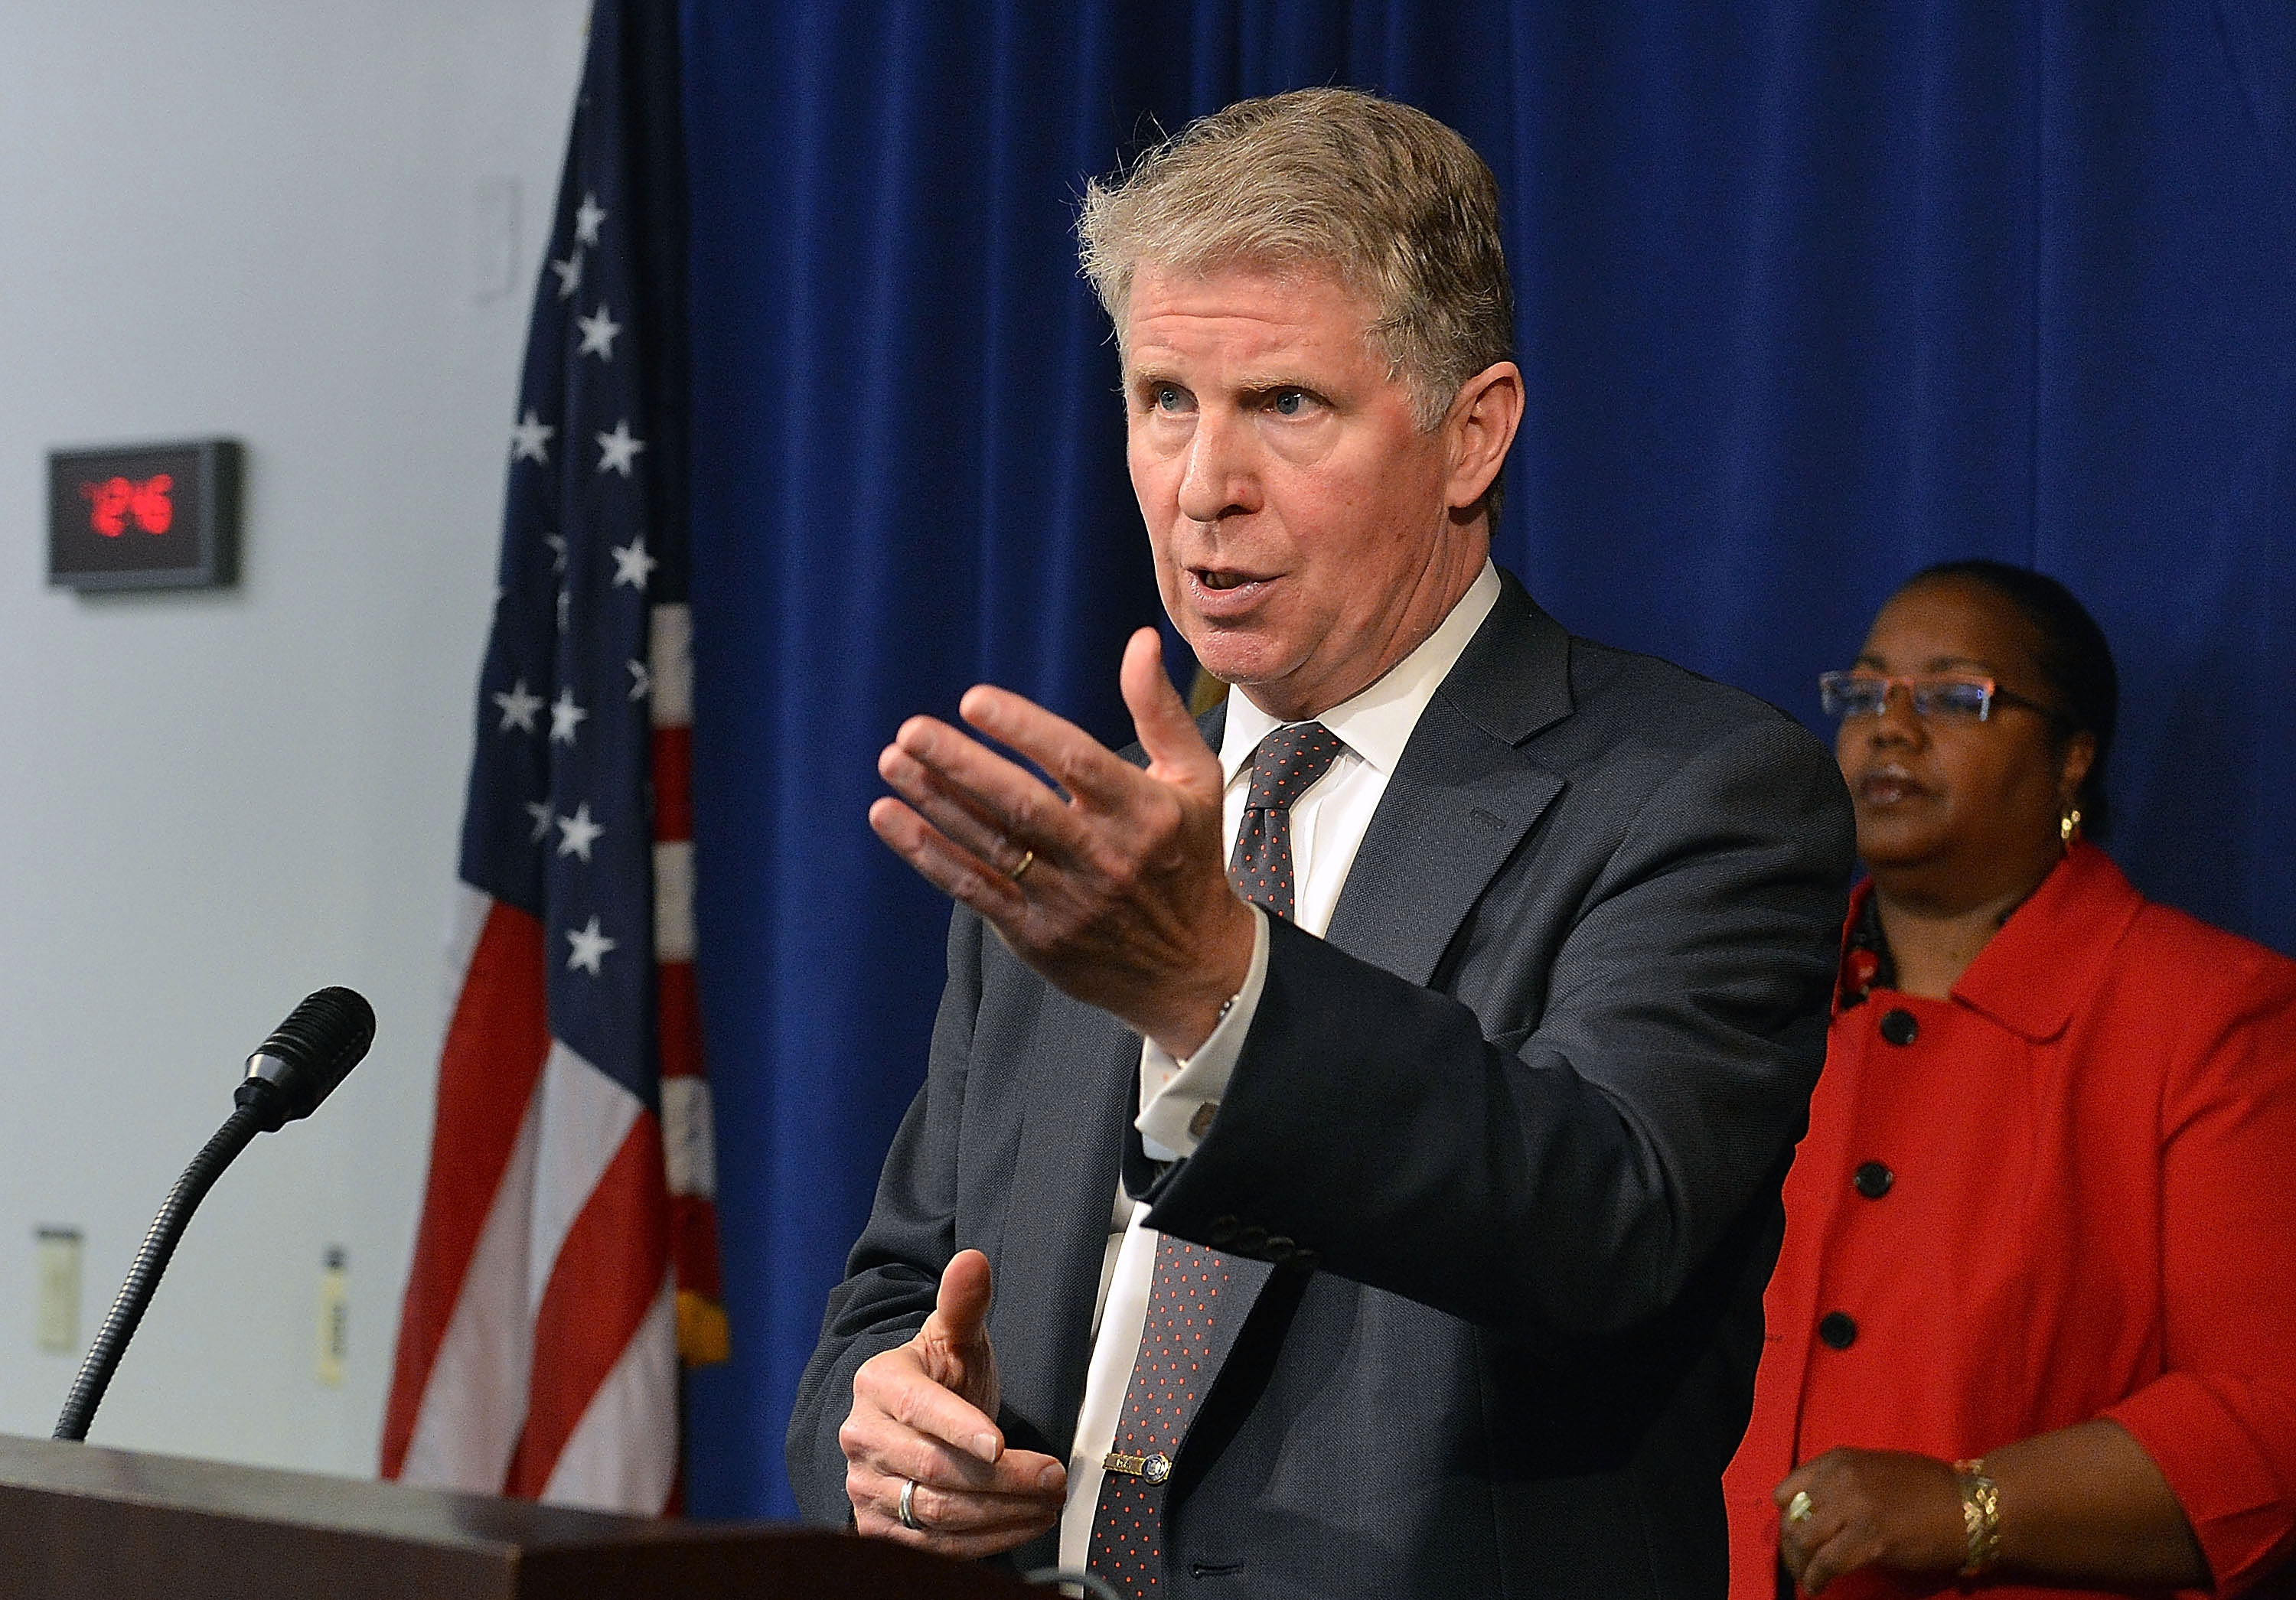 Manhattan District Attorney Cyrus Vance at a press conference last year. (Photo by Slaven Vlasic/Getty Images)